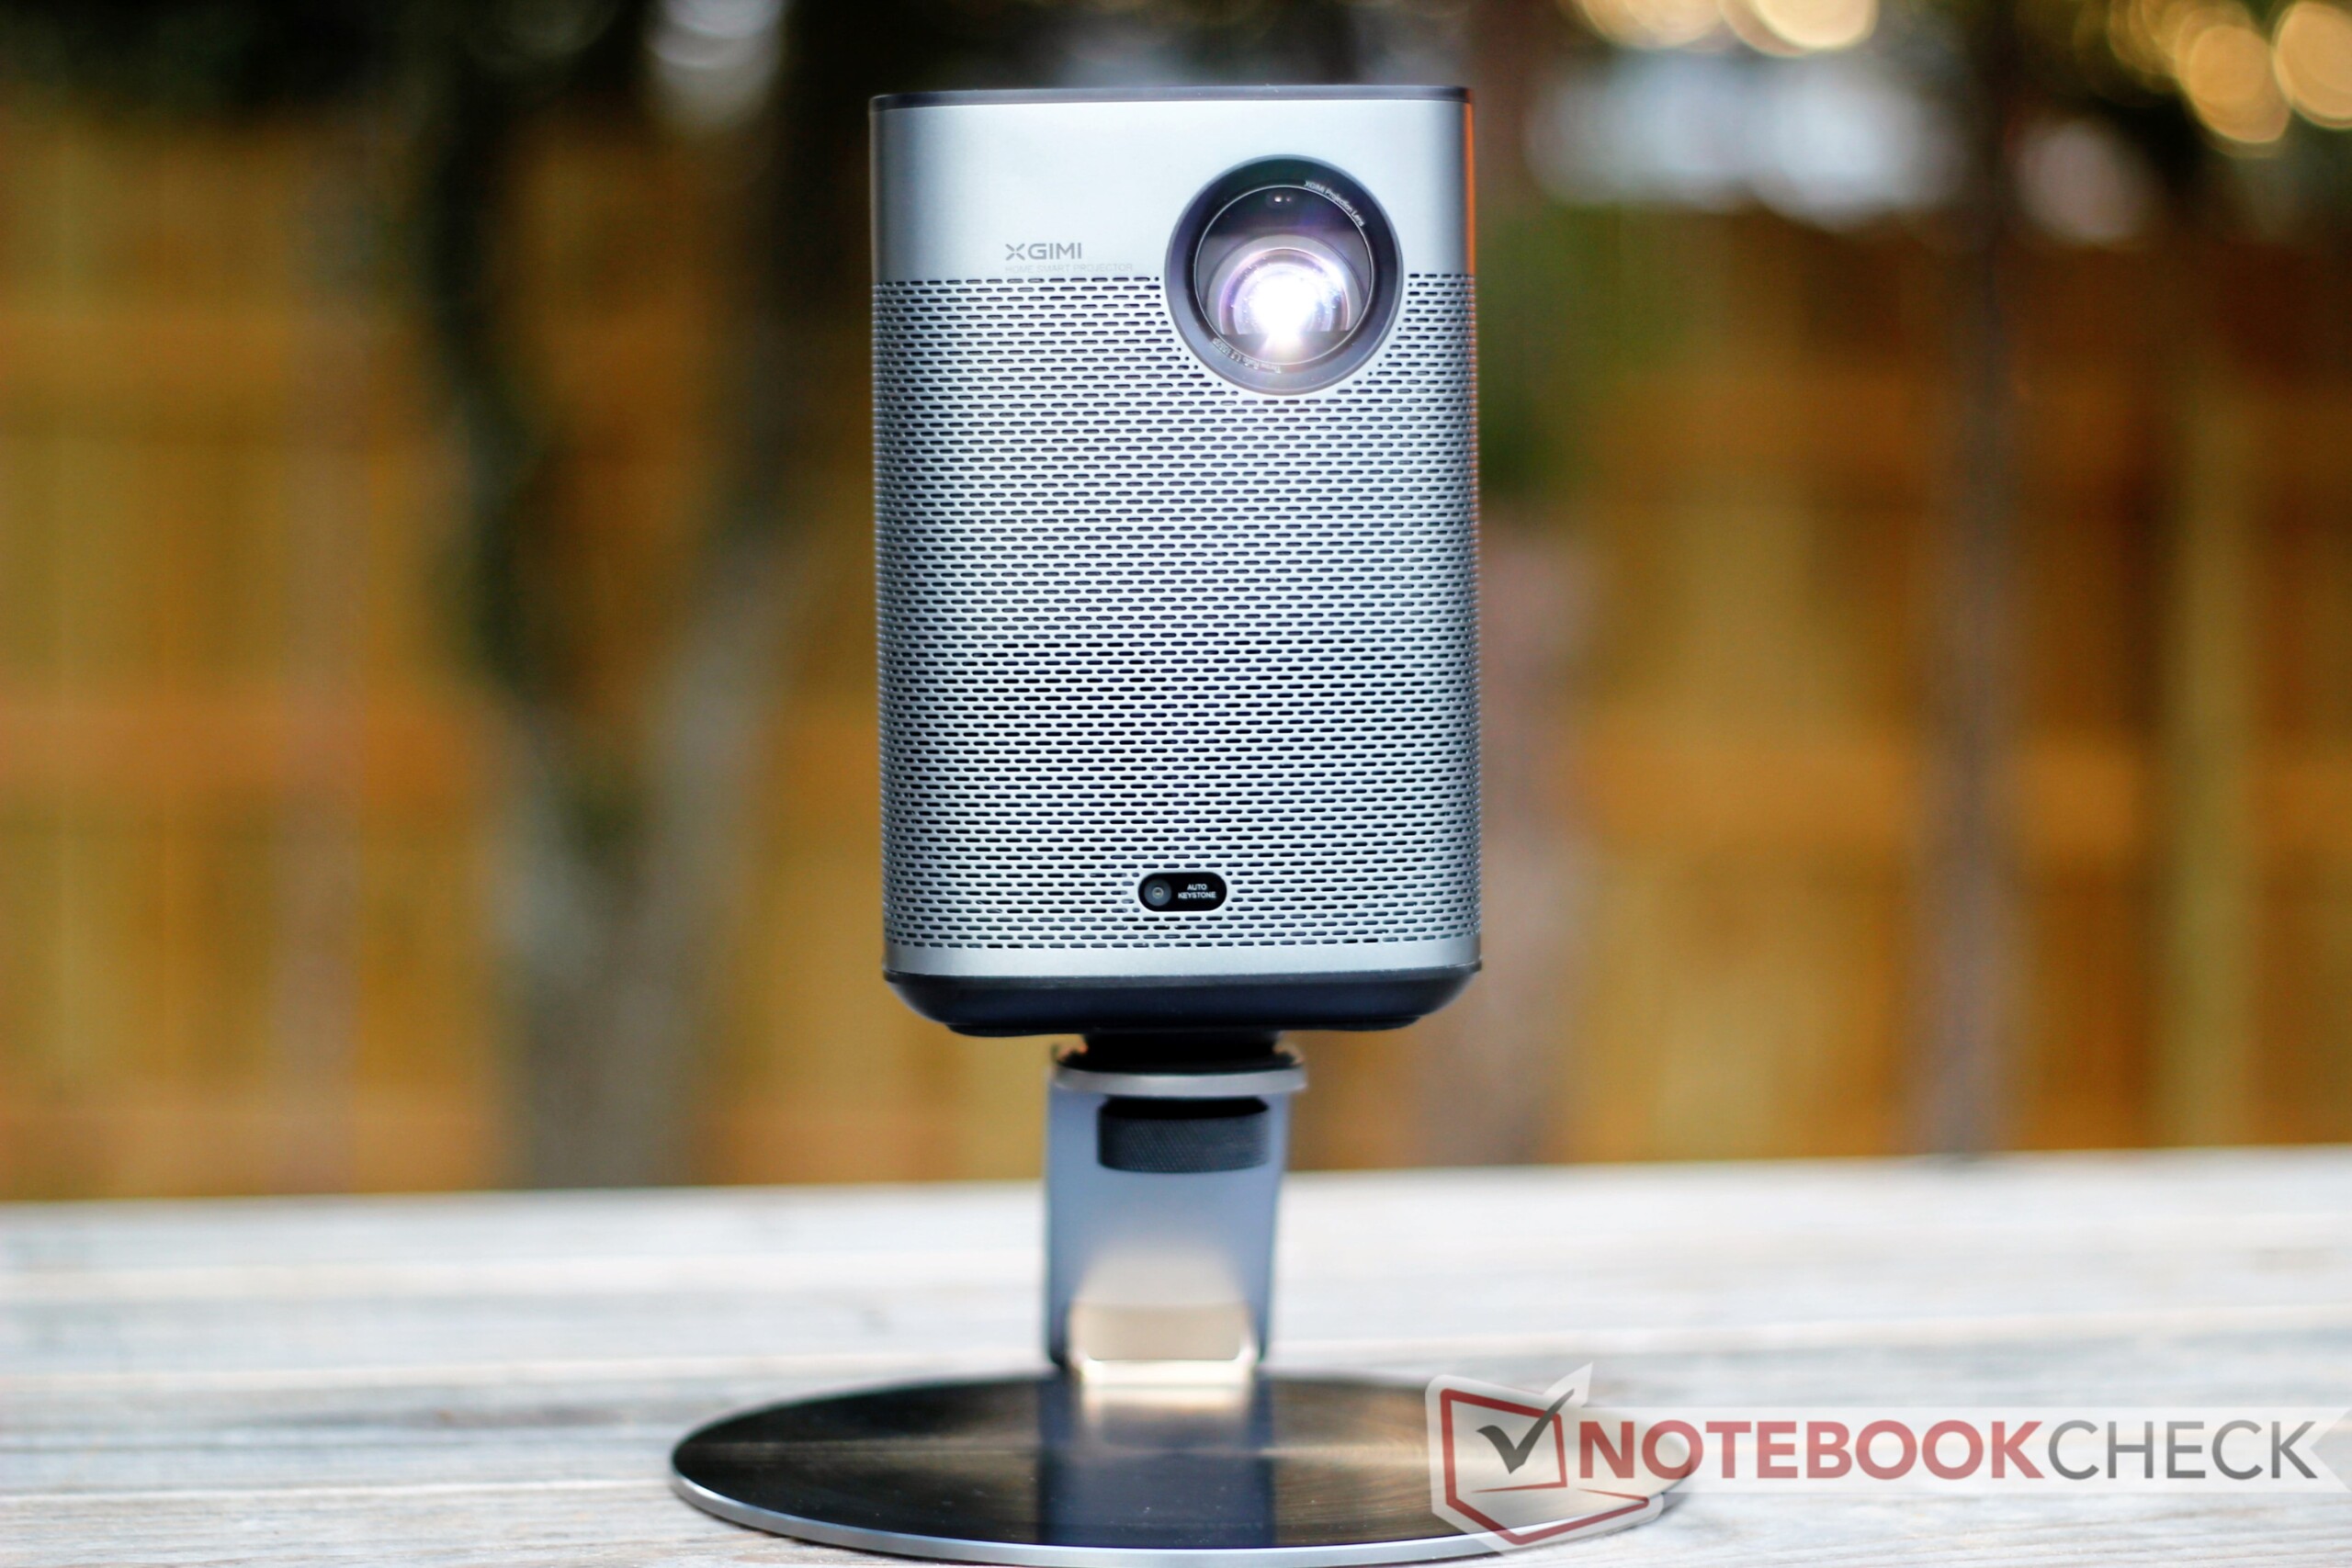 Xgimi Halo Plus (Halo+) portable smart projector hands-on -   News